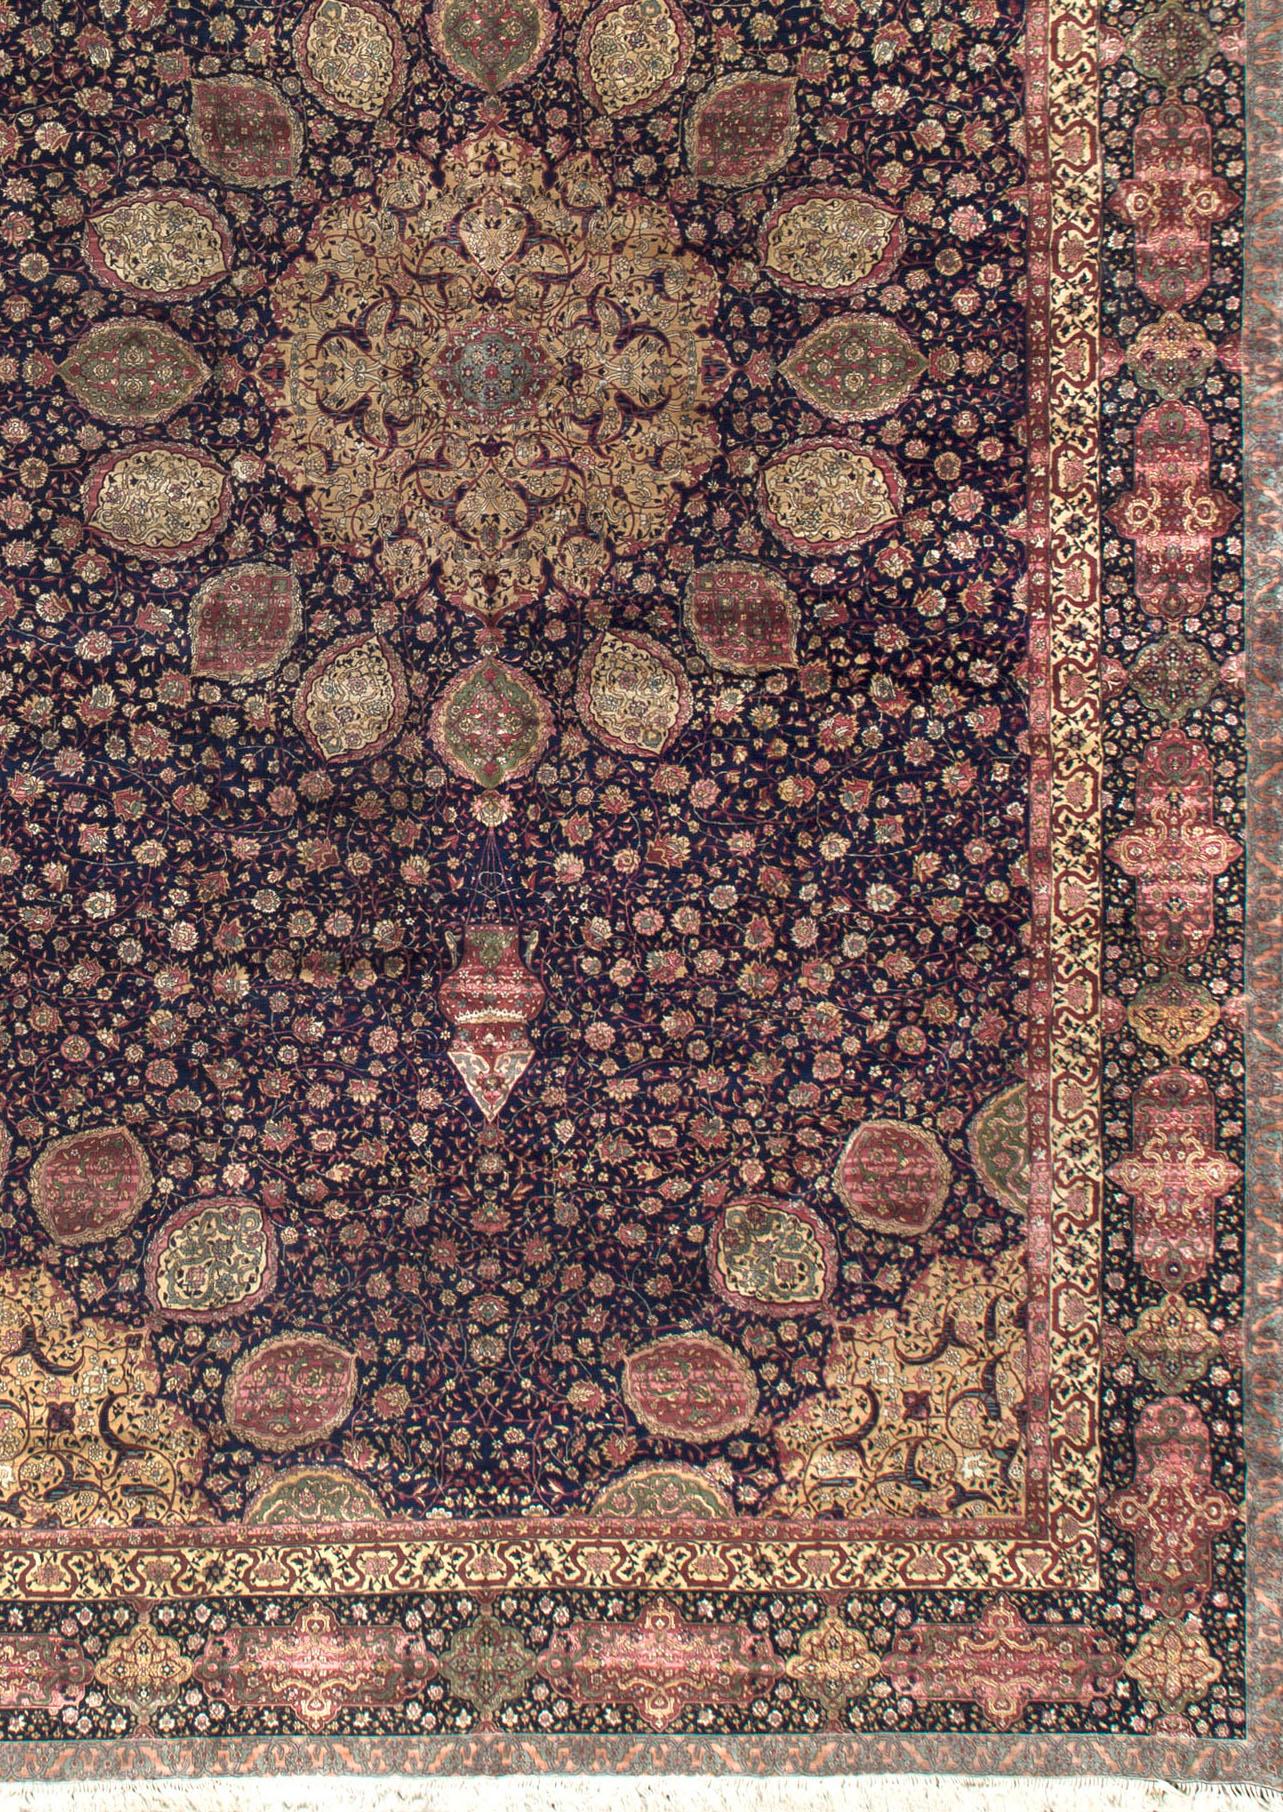 This rug is a replica based off of the world-famous London Ardabil Carpet. The original carpet dates back to 1539, while this replica dates hundreds of years old as well. The rug, which has been displayed at the Victoria and Albert Museum in London,